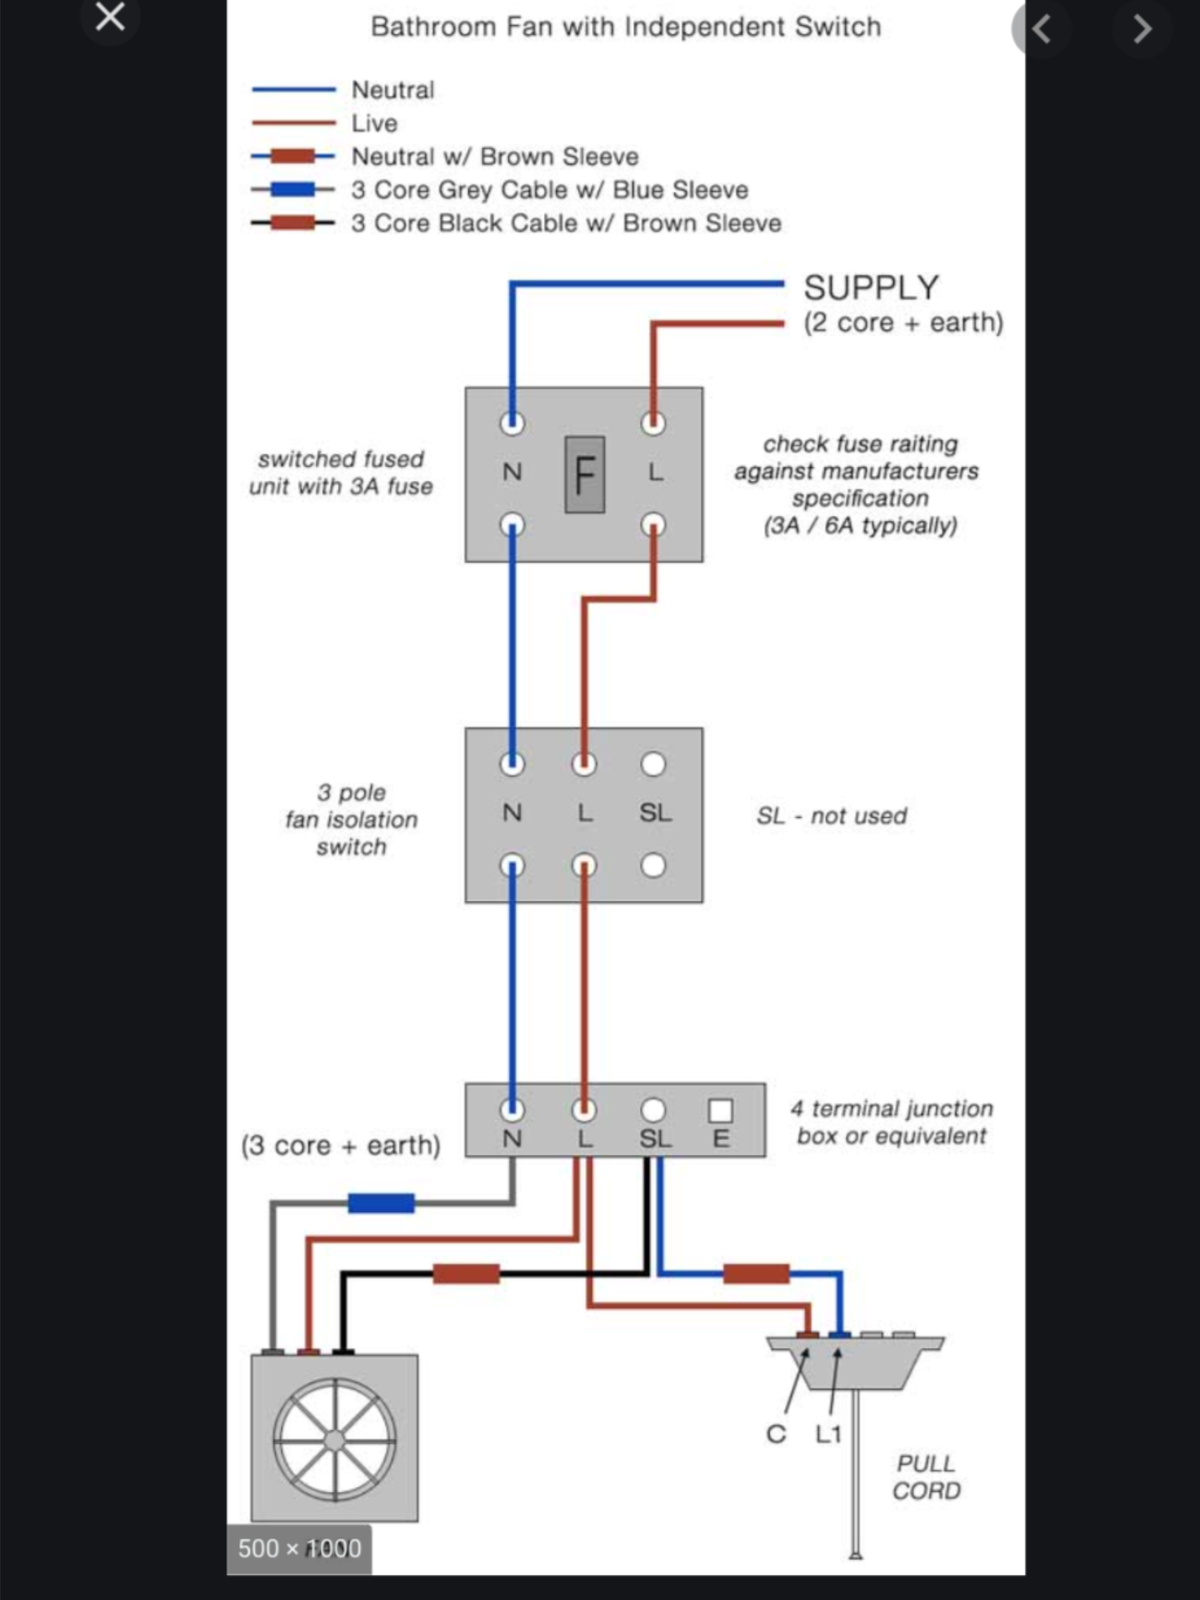 3 Amp Fused Switch And Fan Isolator, 3 Pole Isolator Switch Wiring Diagram